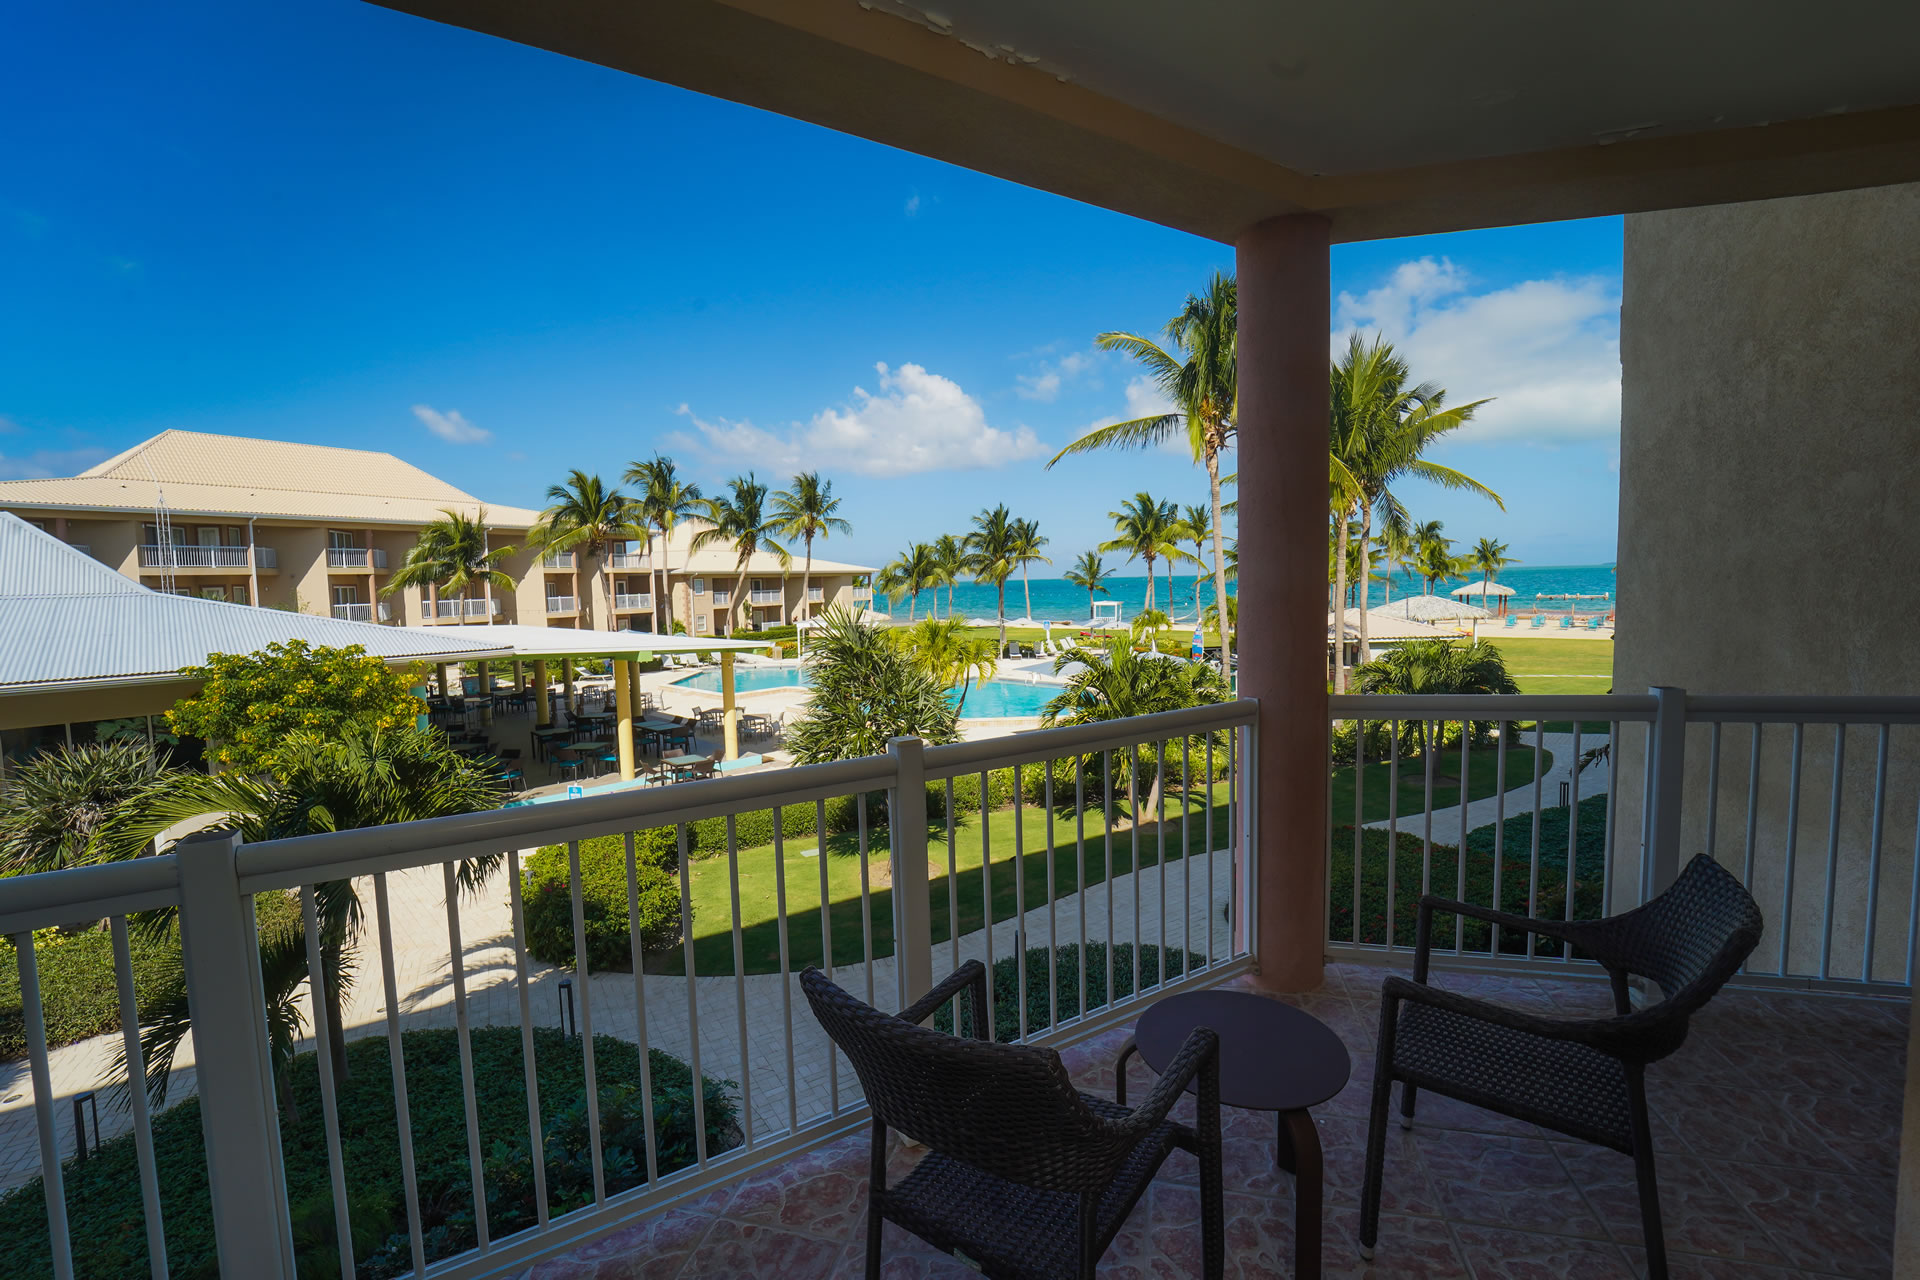 View of the resort pool and courtyard from the balcony of a guest suite at the Grand Caymanian Resort